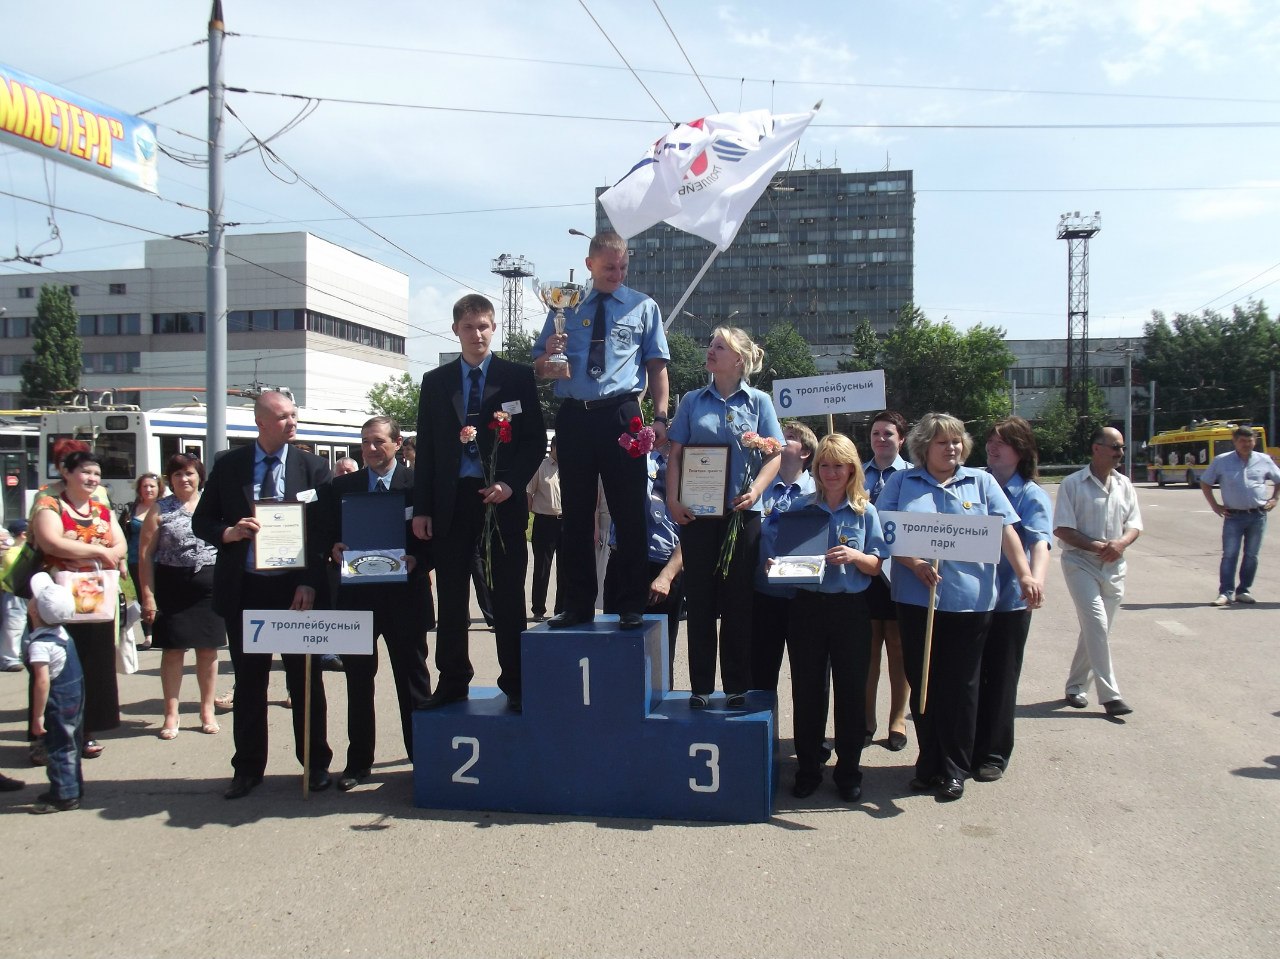 Moskva — 34th Championship of Trolleybus Drivers